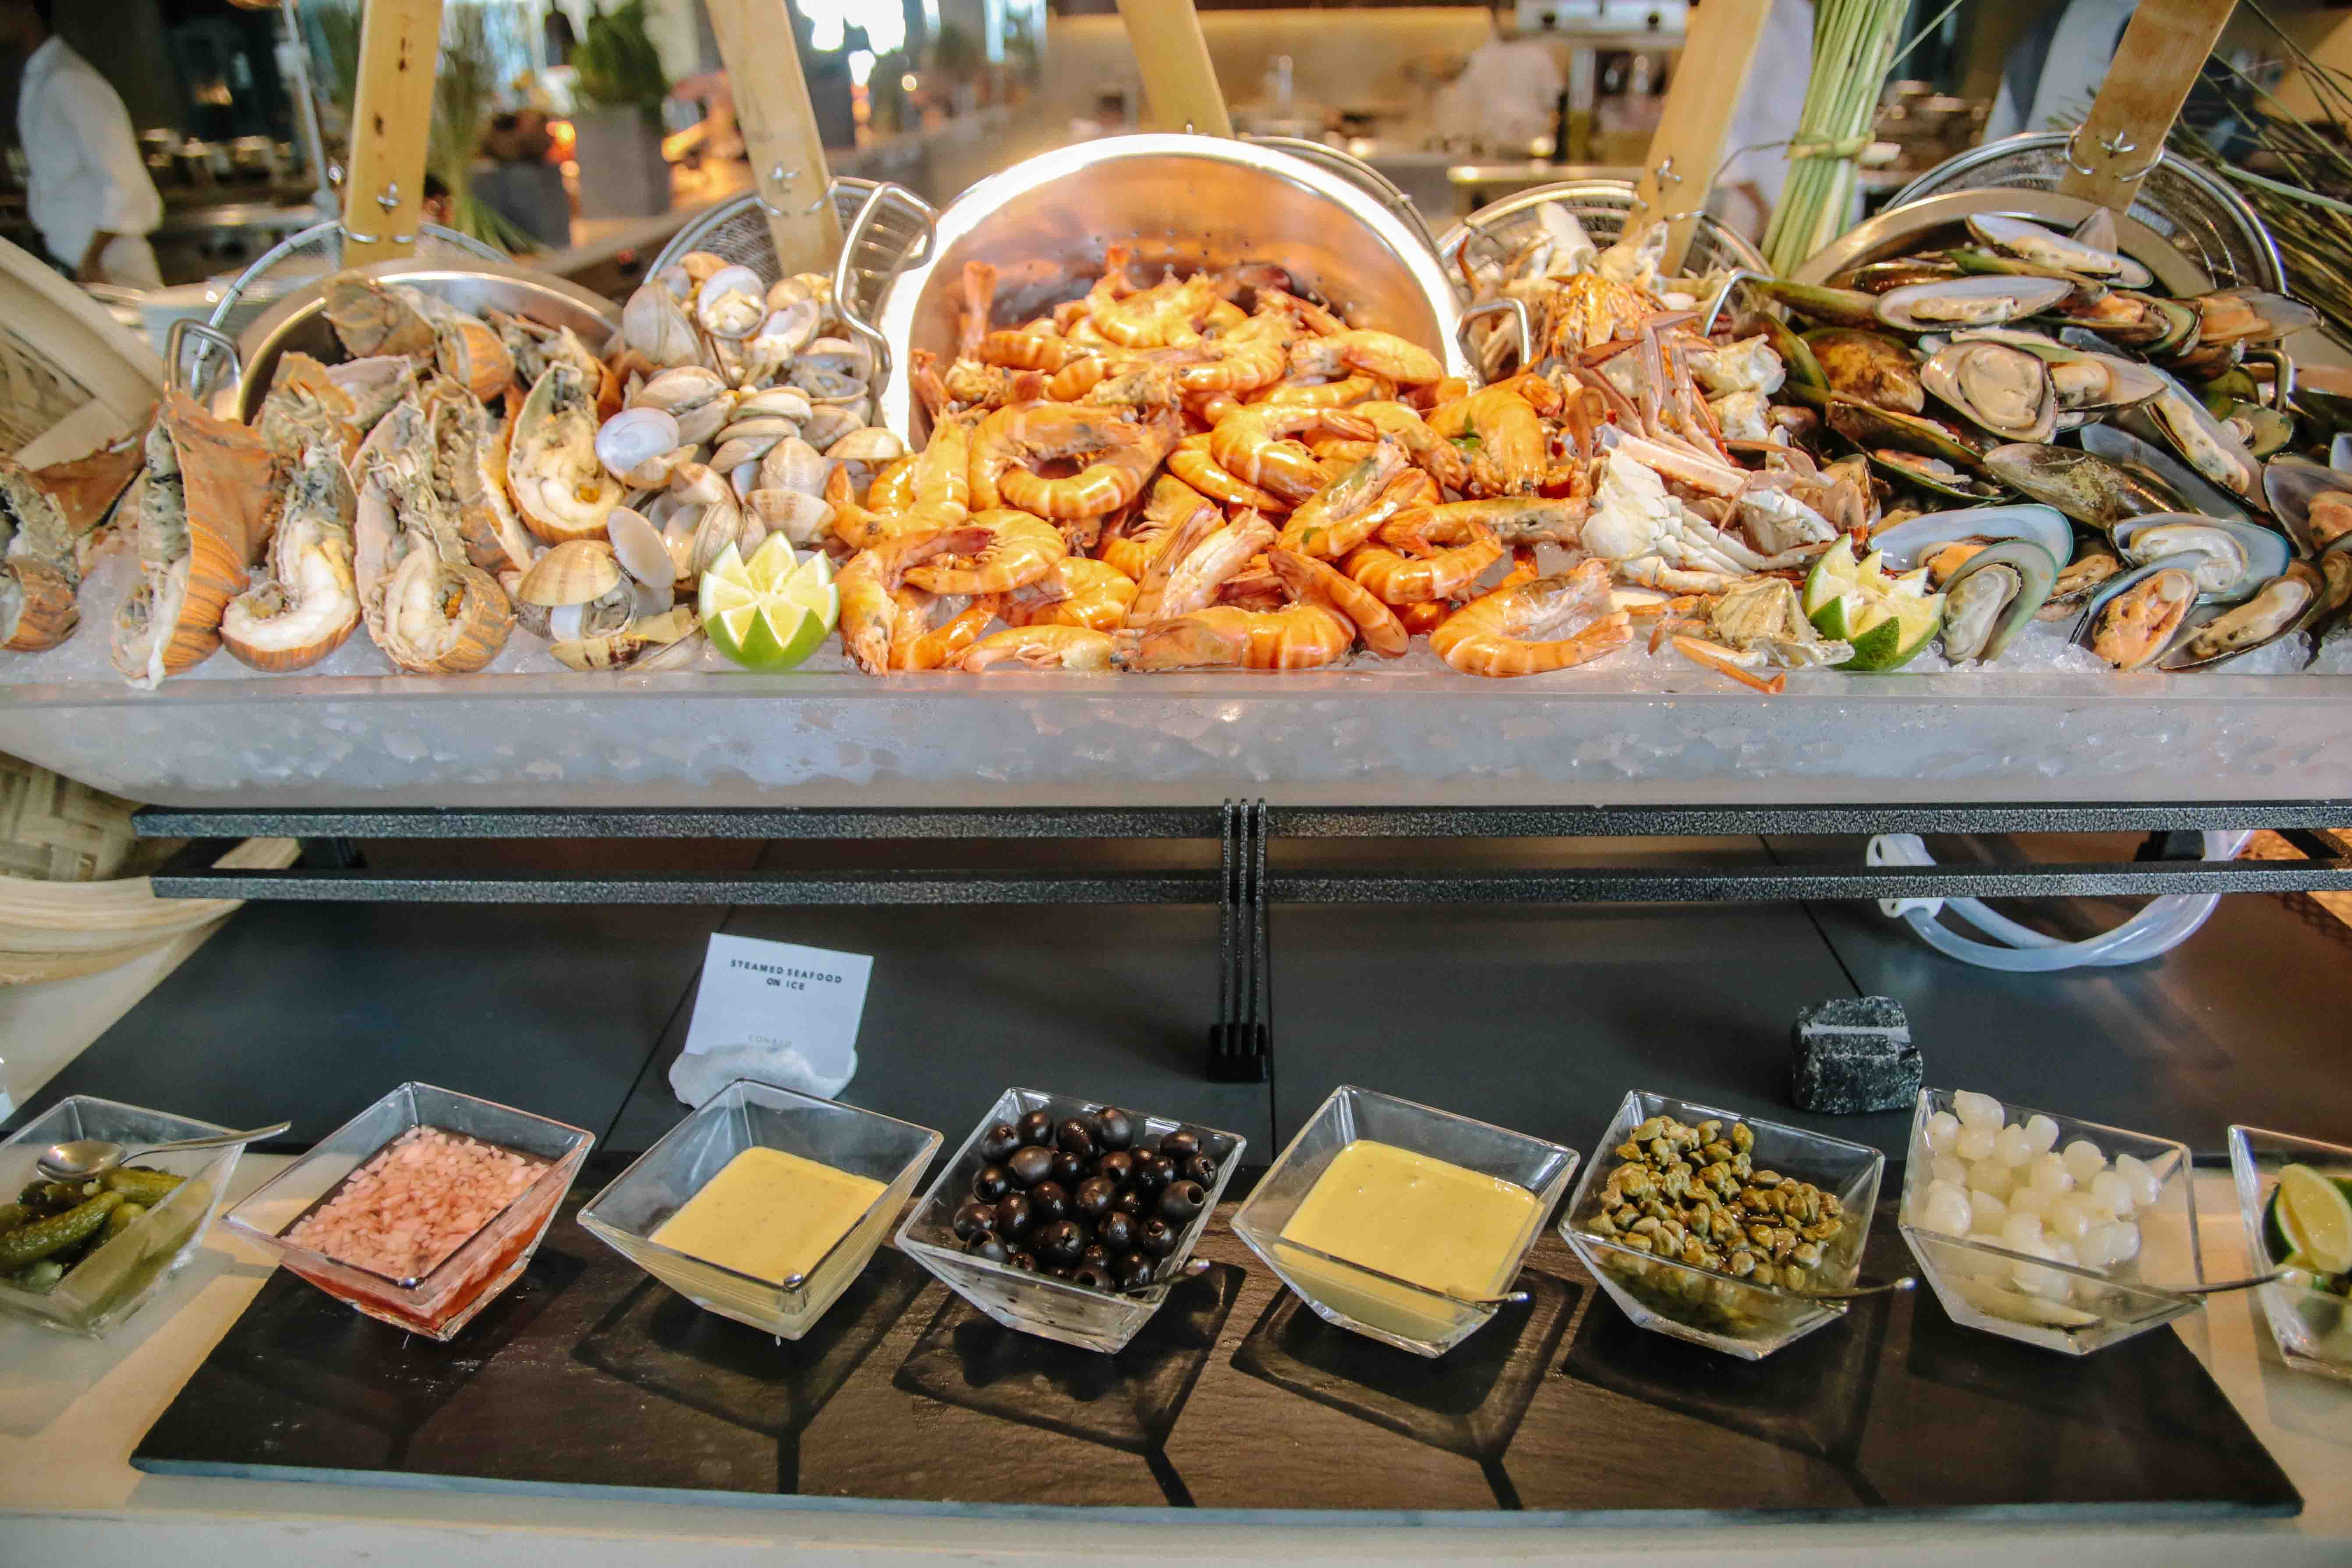 IN PHOTOS: What to eat at the Conrad Manila hotel buffet